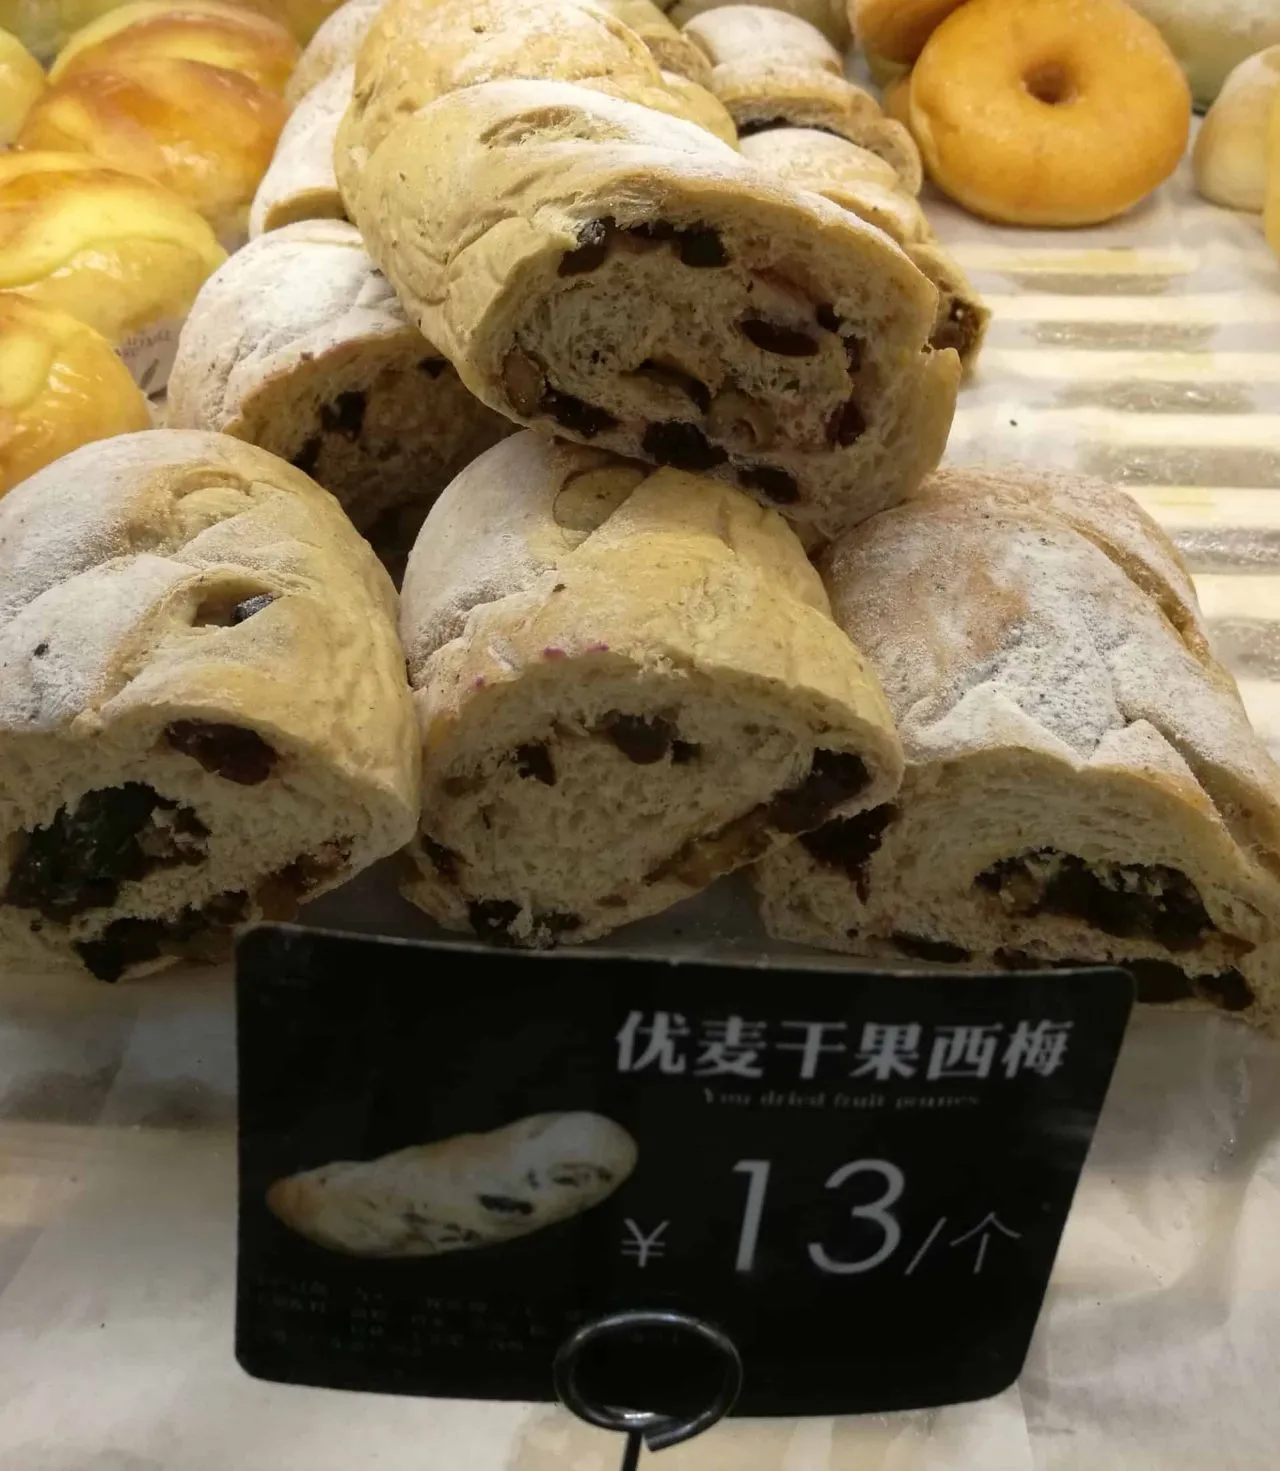 Chinese Bakery chain promotion